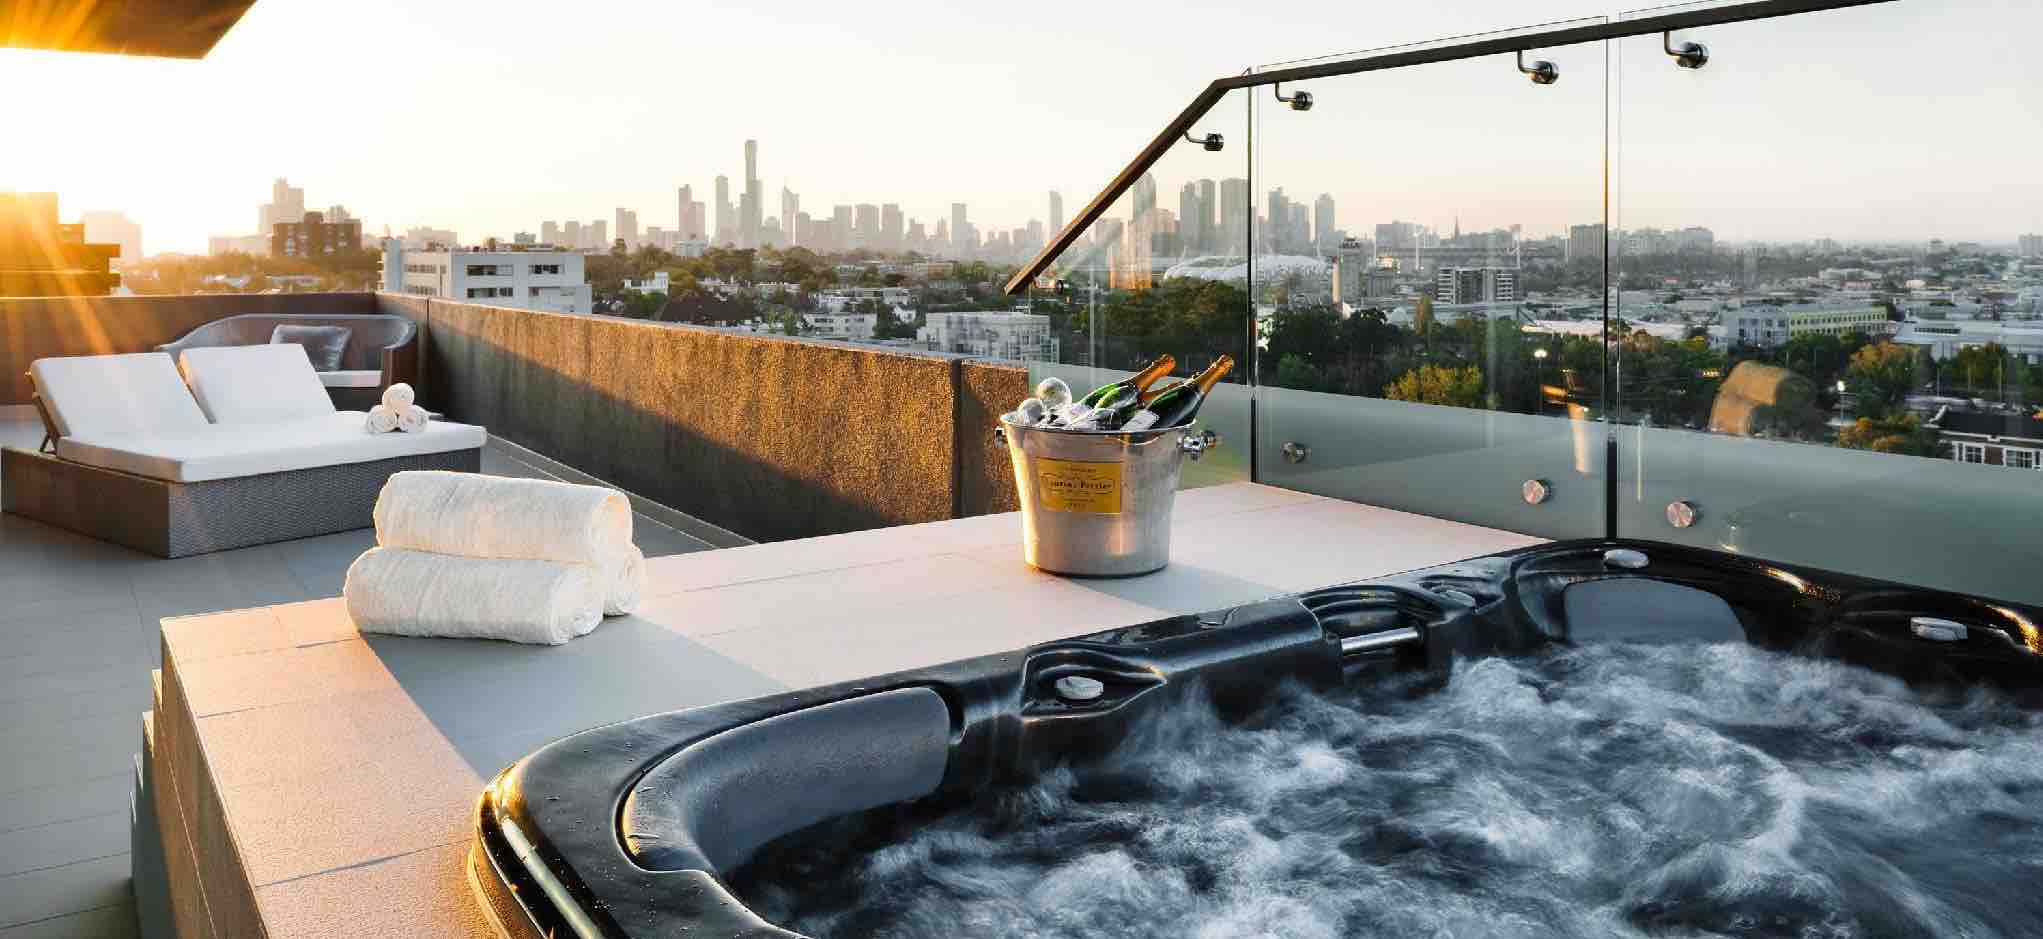 Photo of a jacuzzi with a few drinks and a bottle of Champagne outside on the terrace of a suite with a couple of loungers for sunbathing